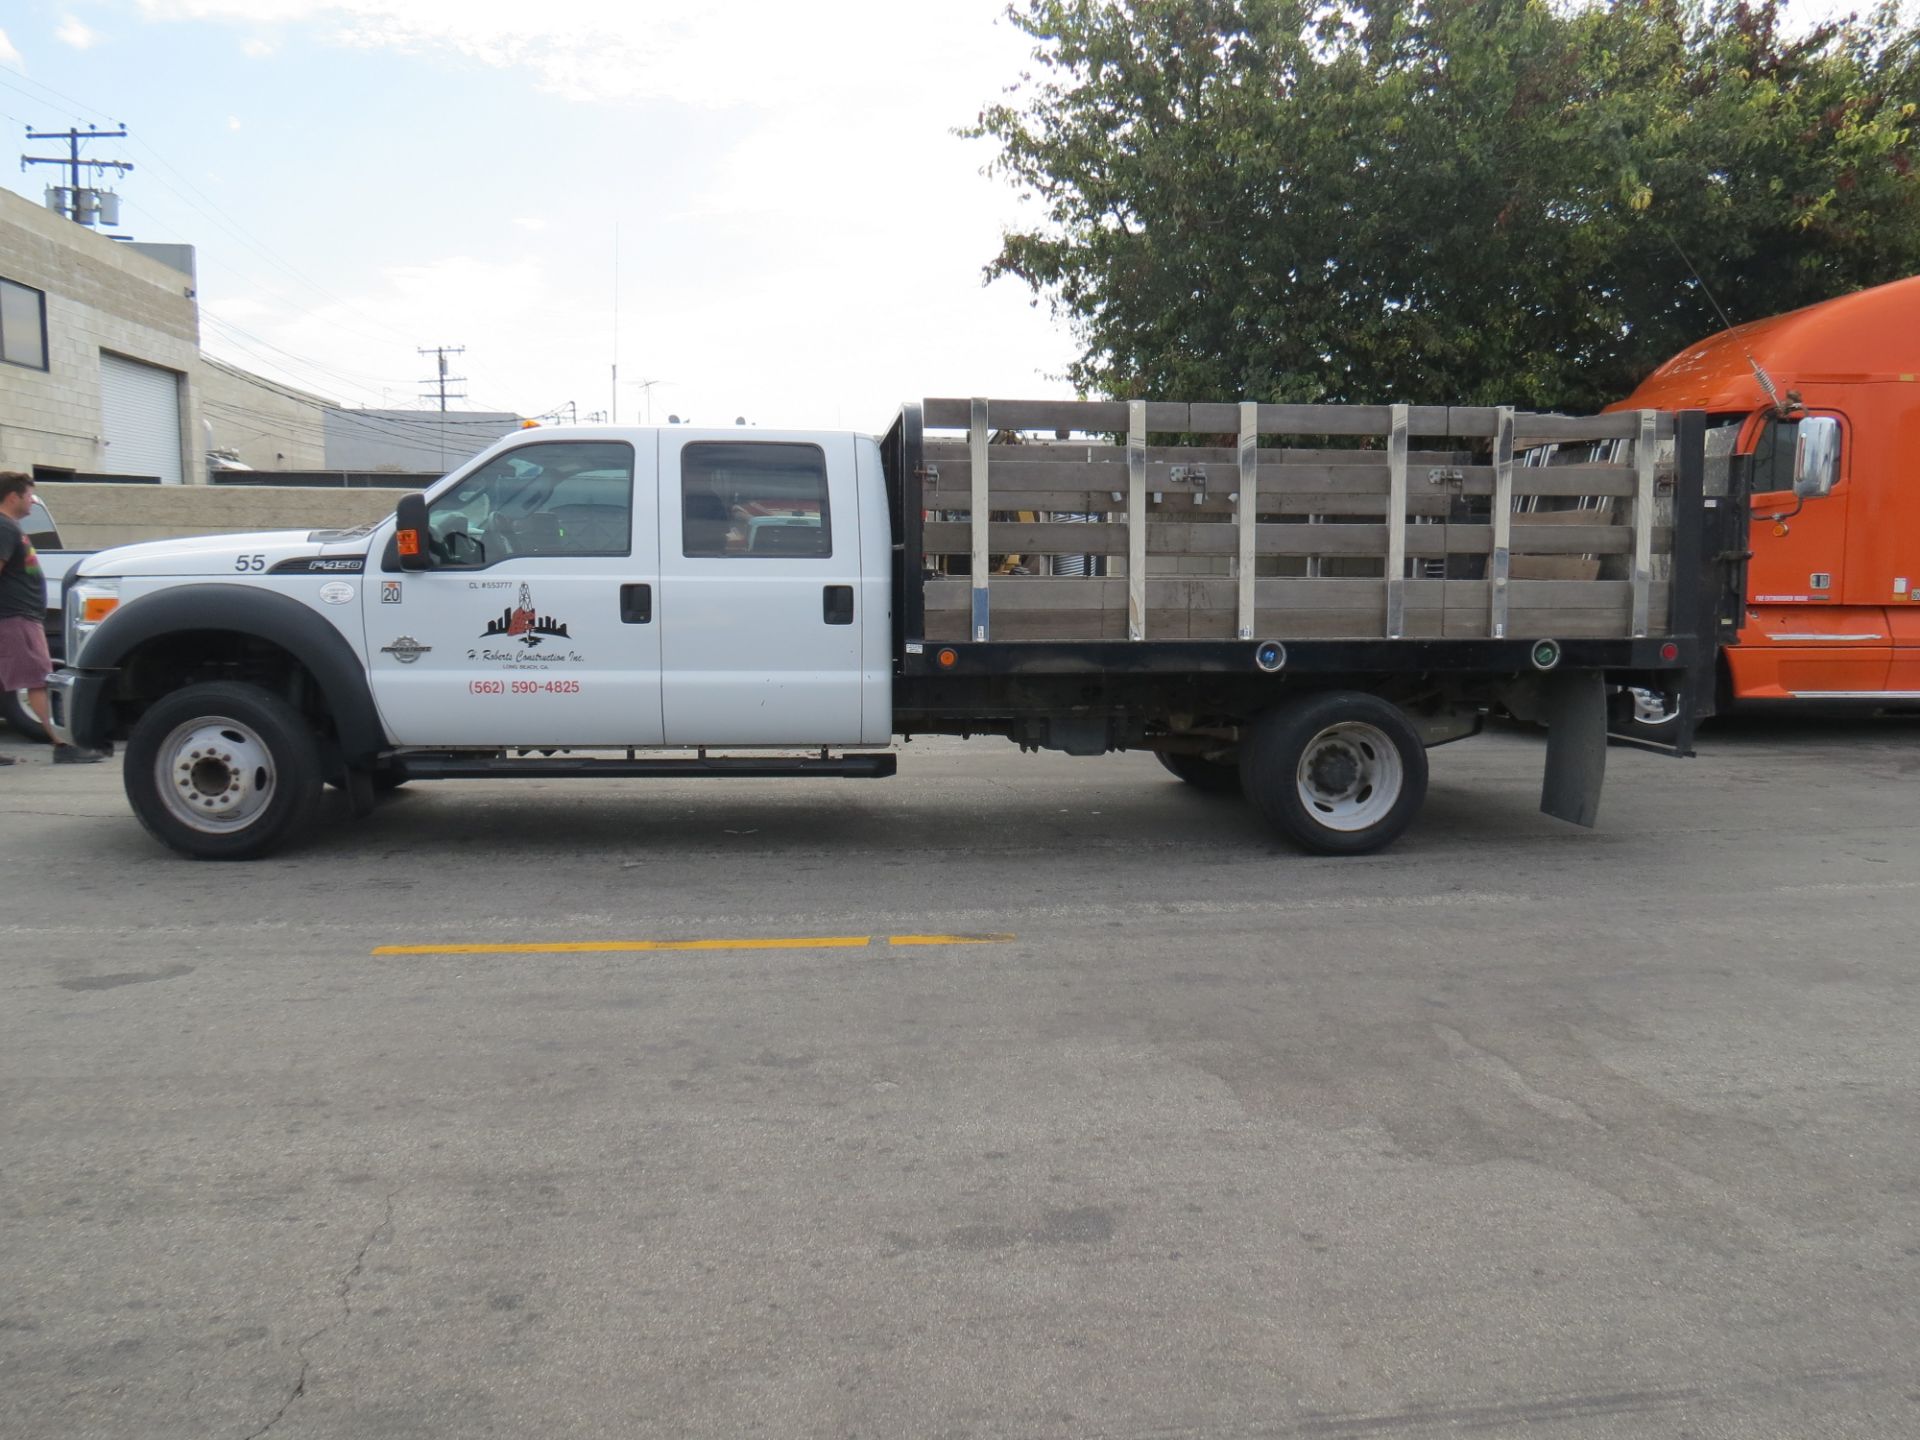 2015 Ford F-450 SUPER DUTY STAKE BED TRUCK, WITH LIFT GATE, SUPER CREW CAB , 6.7 POWER STROKE DIESEL - Image 6 of 34